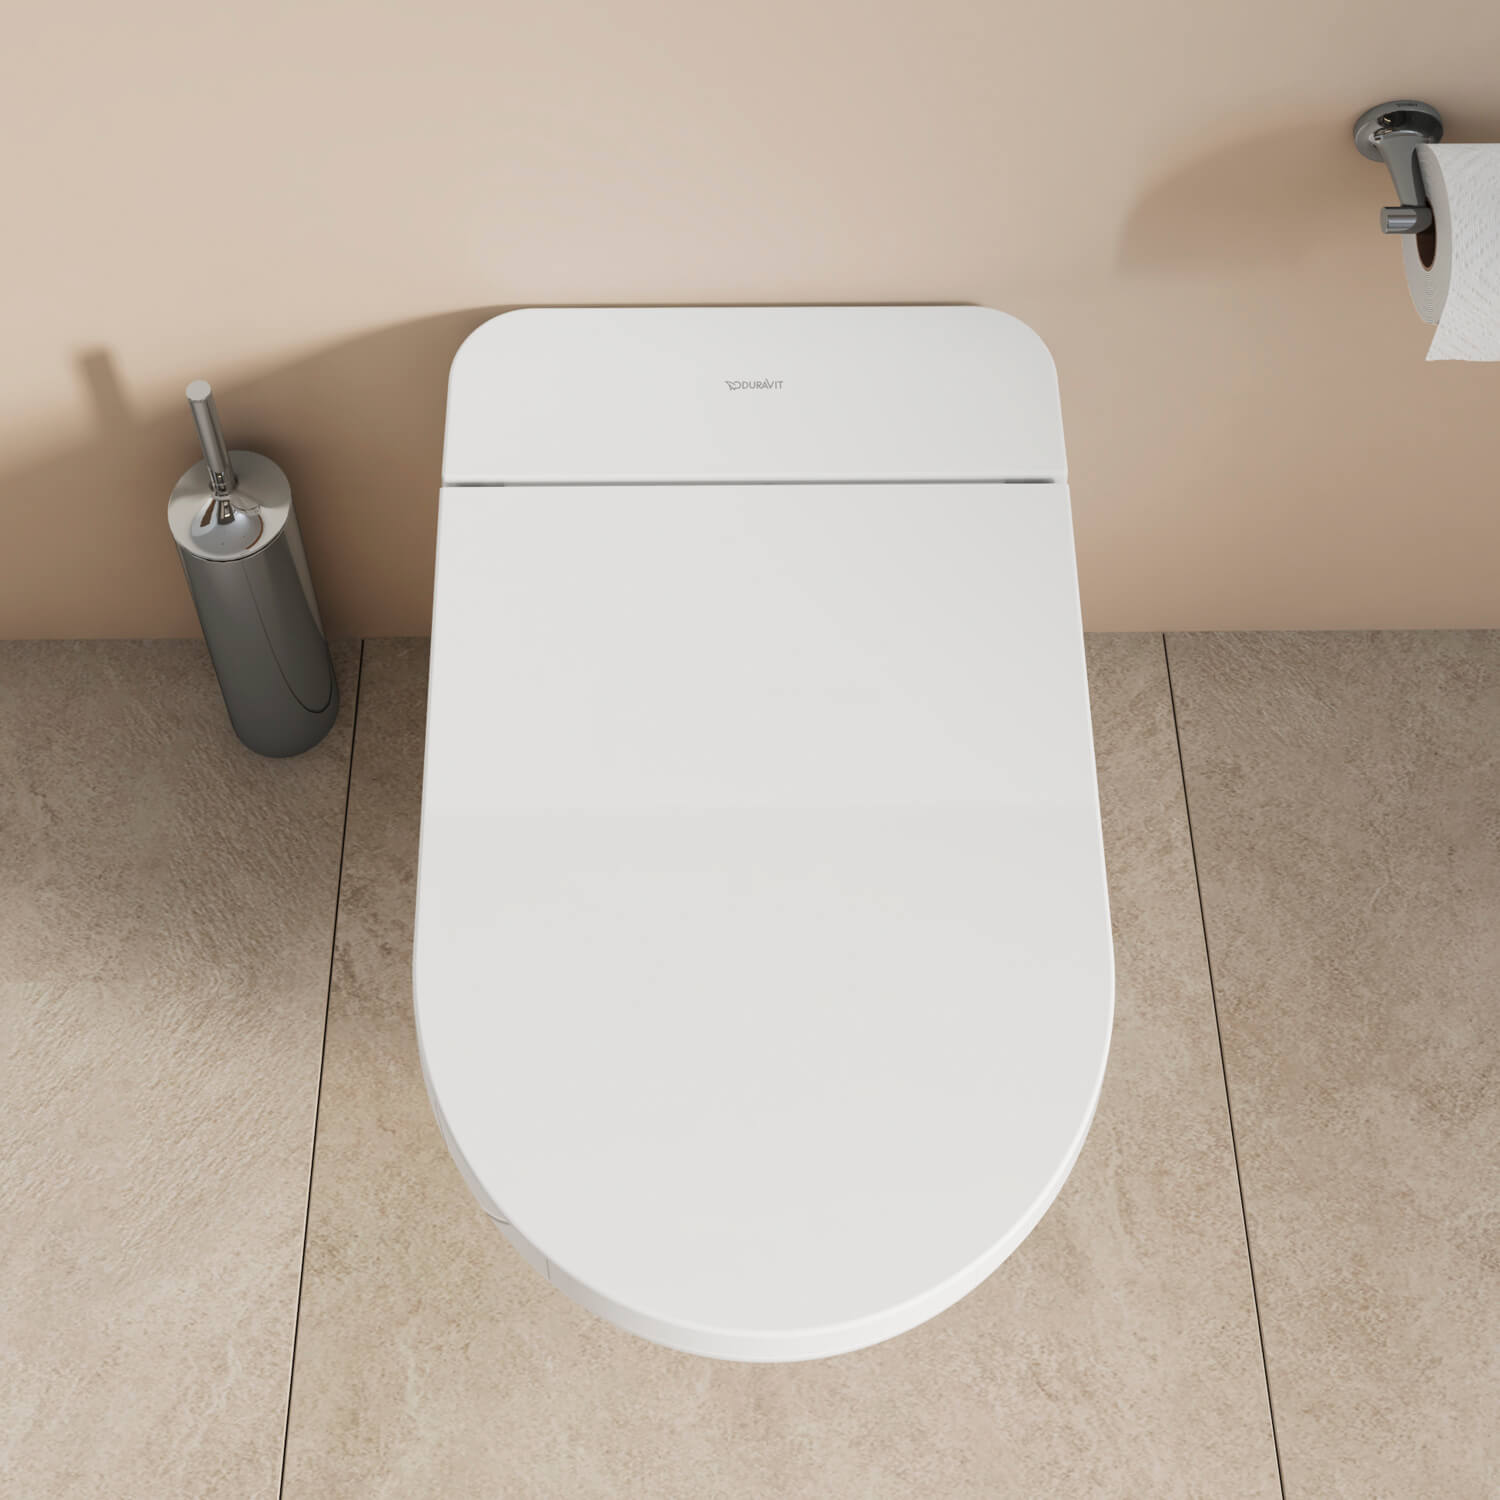 Toilet with descaling function
